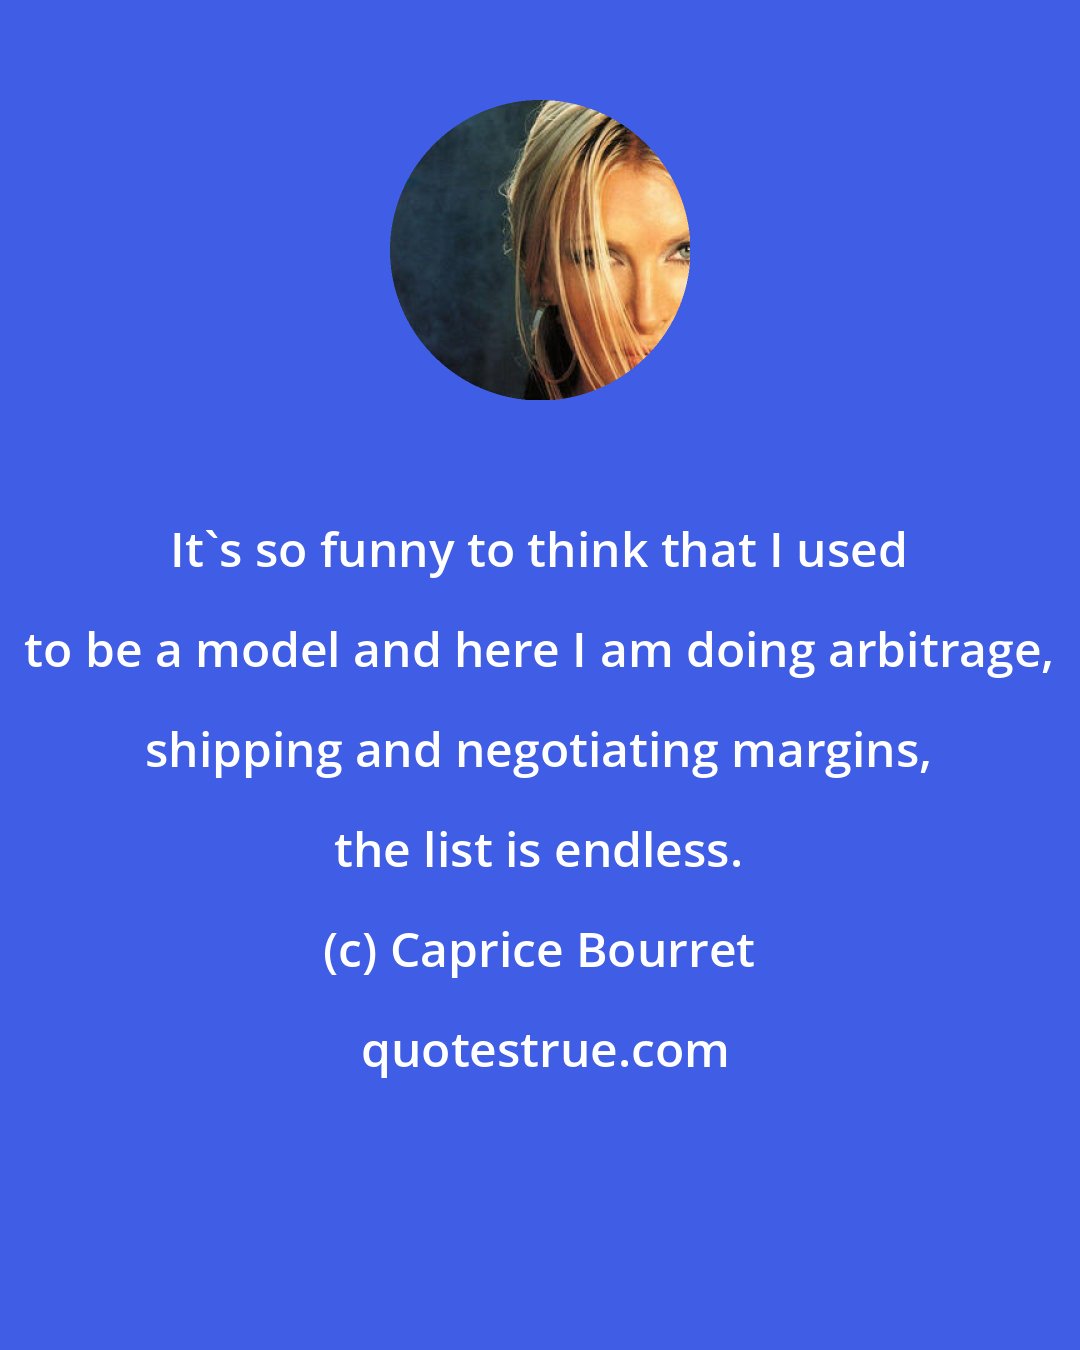 Caprice Bourret: It's so funny to think that I used to be a model and here I am doing arbitrage, shipping and negotiating margins, the list is endless.